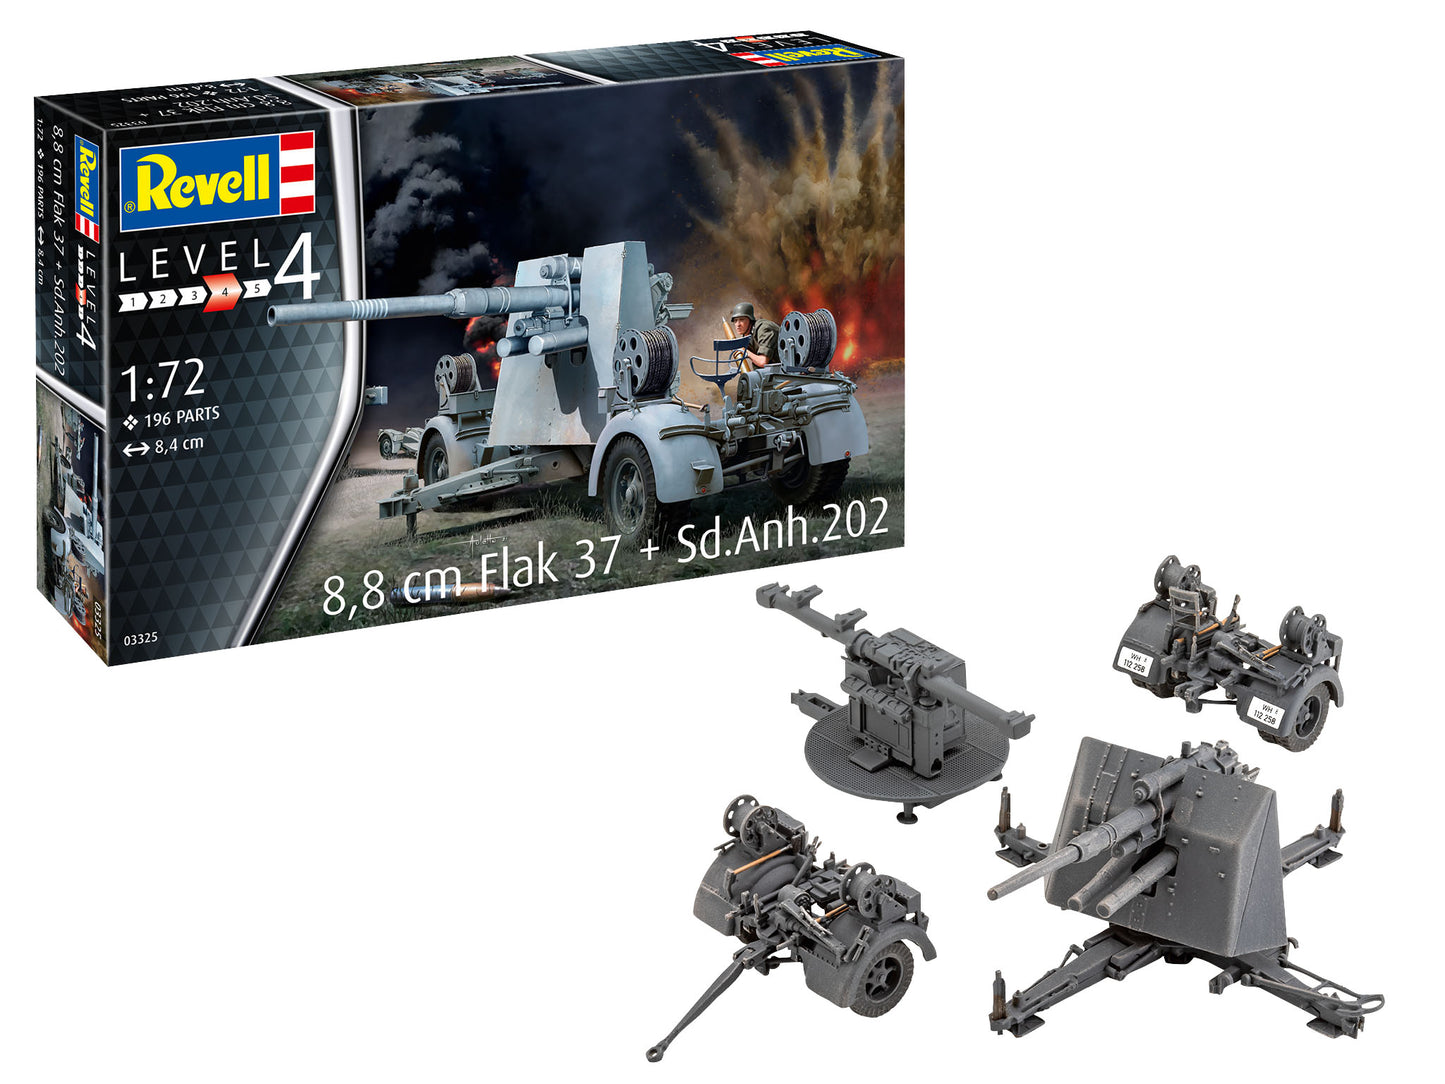 Revell 1/72nd scale 8.8cm Flak 37 + Sd.Anh.202